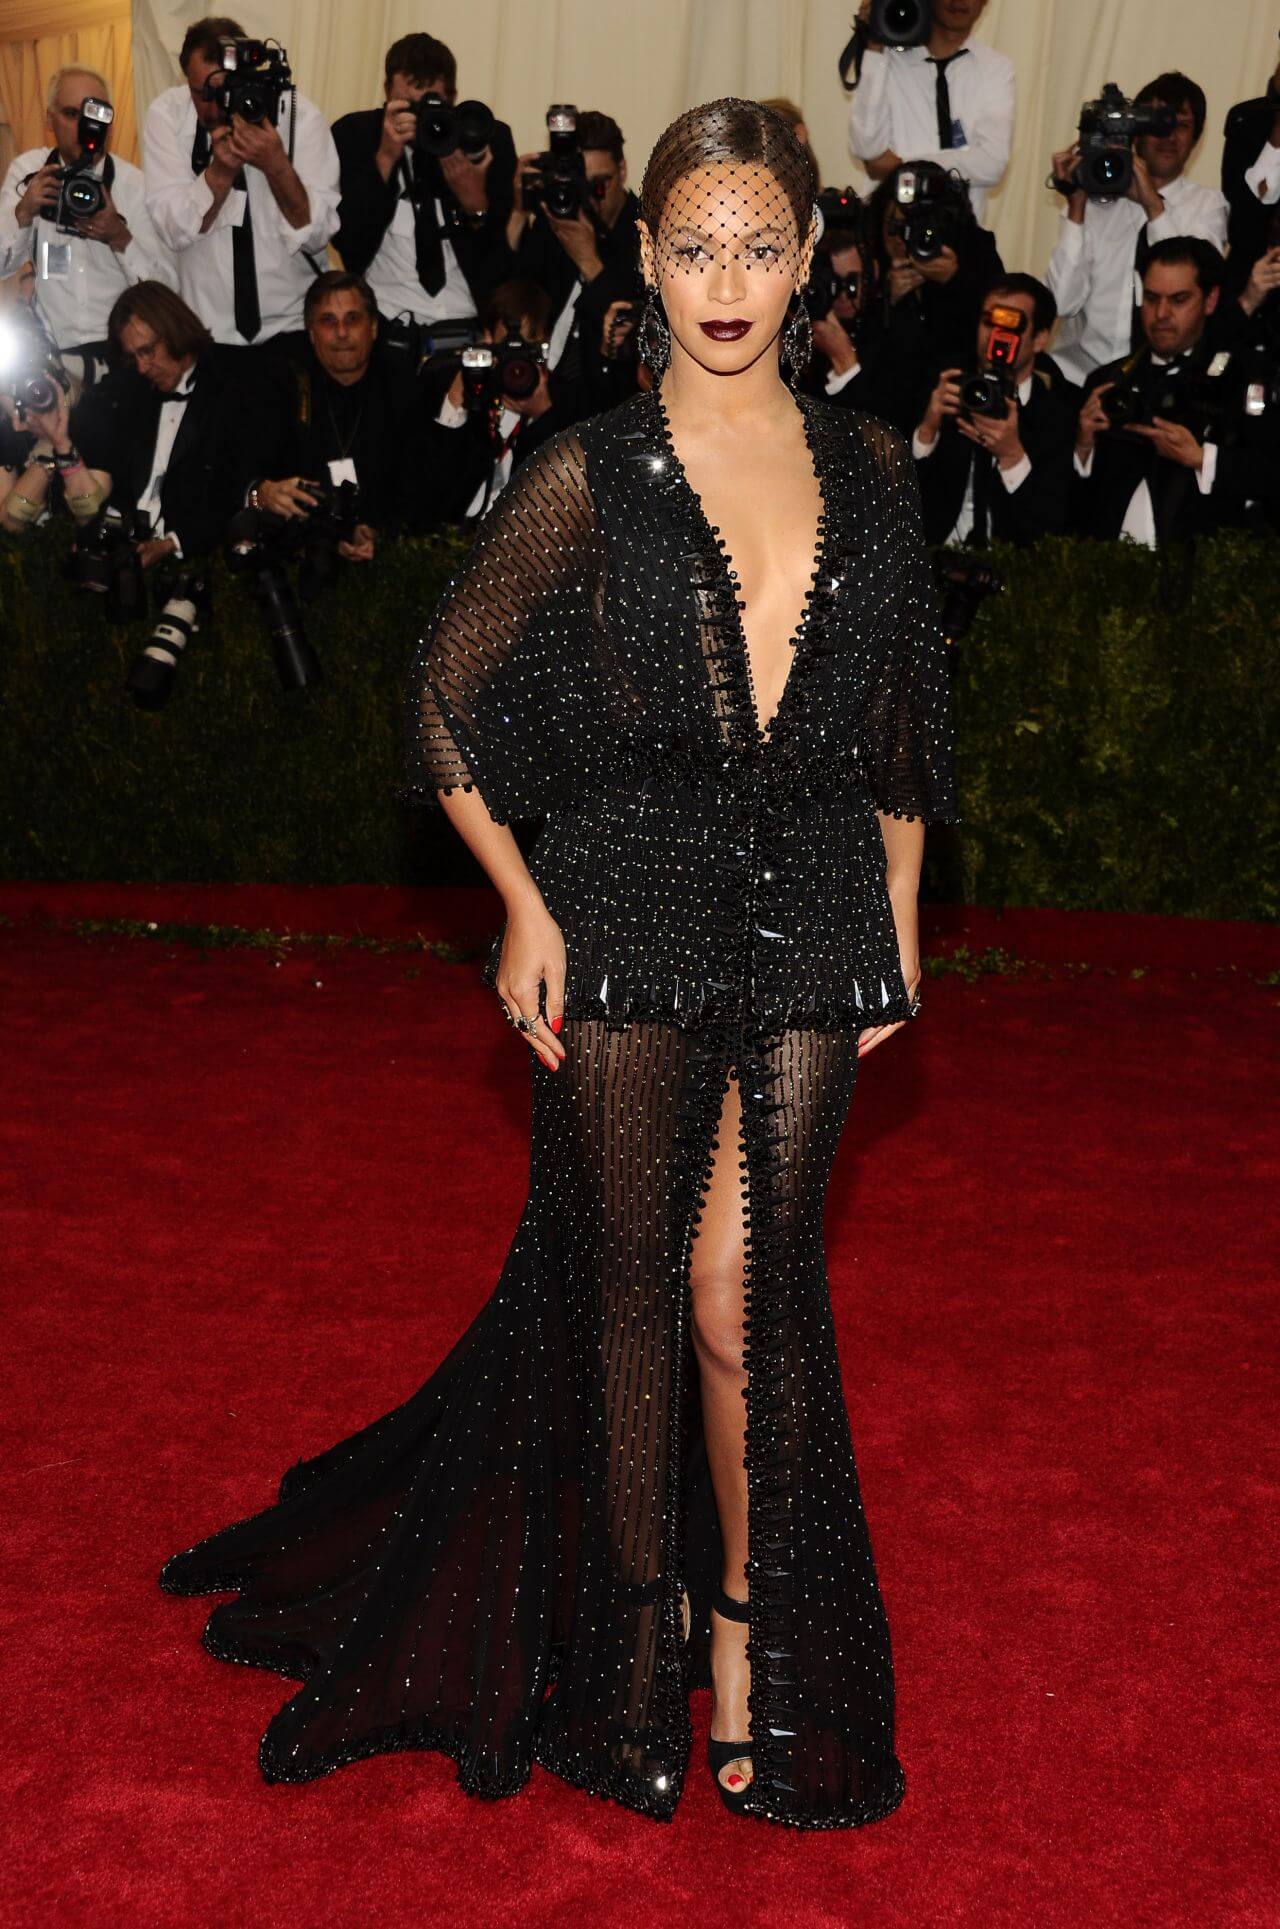 Beyonce Knowles Wearing In Black Shimmery With Punk Style Long Gown At Met Costume Institute Gala